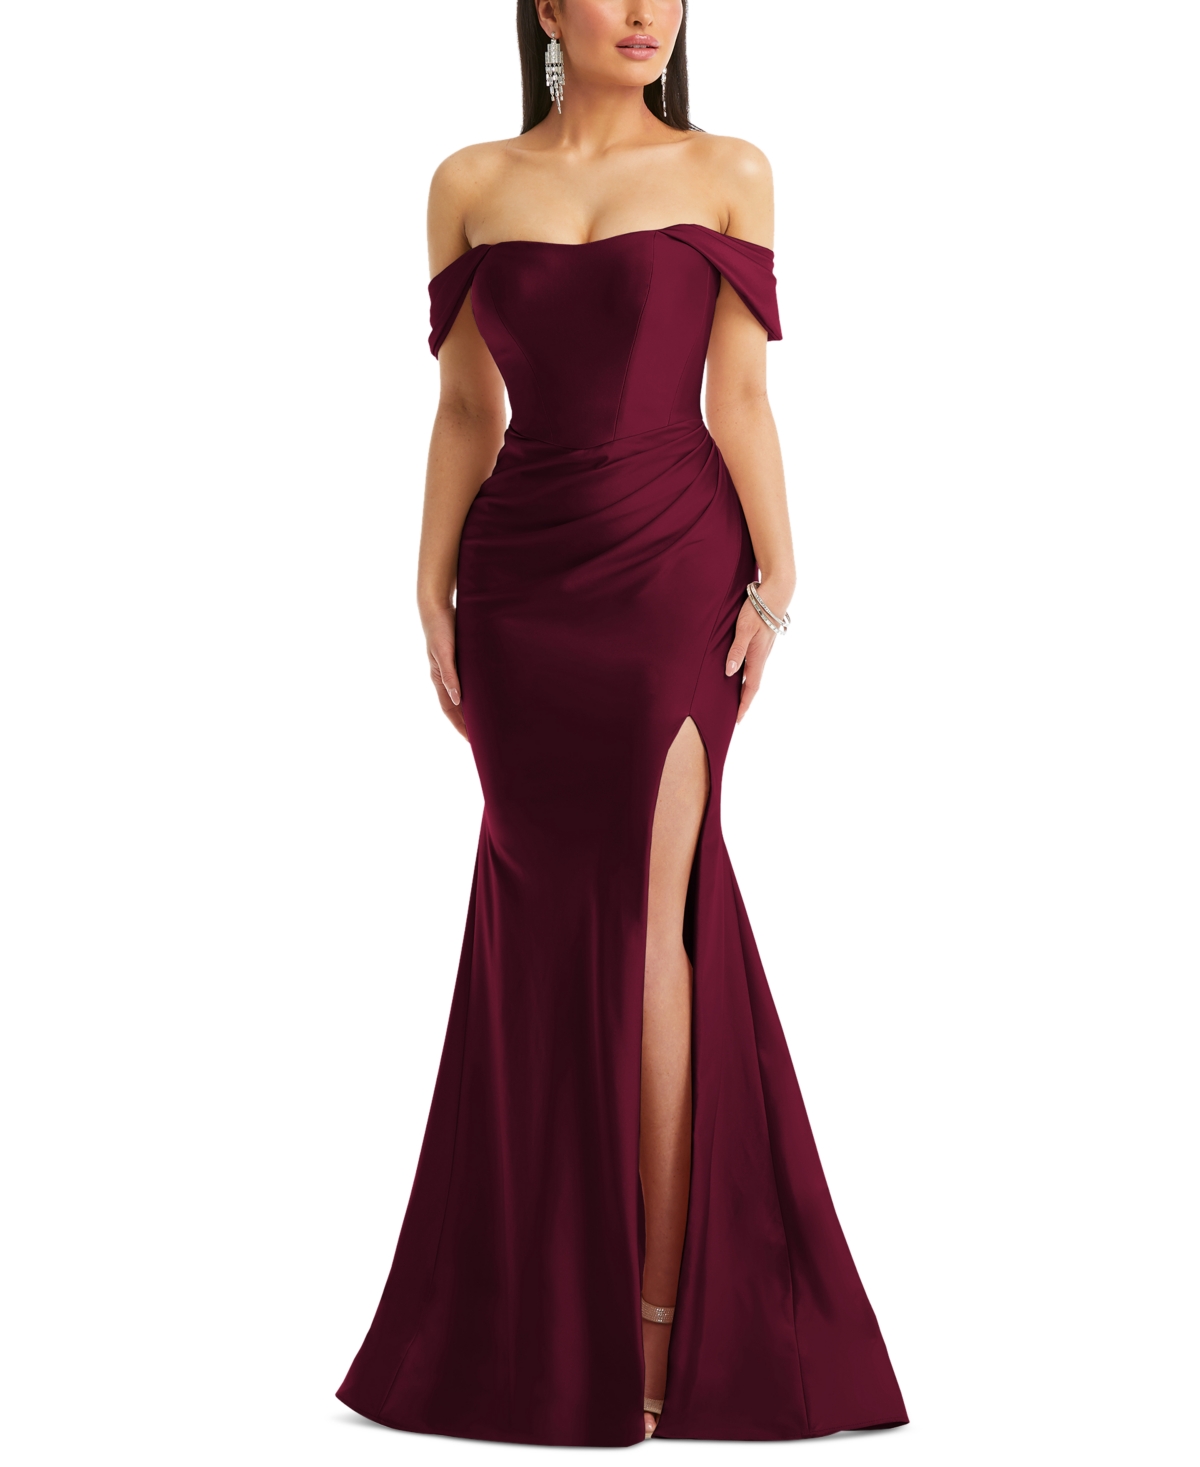 Dessy Collection Women's Off-The-Shoulder Corset Satin Mermaid Gown